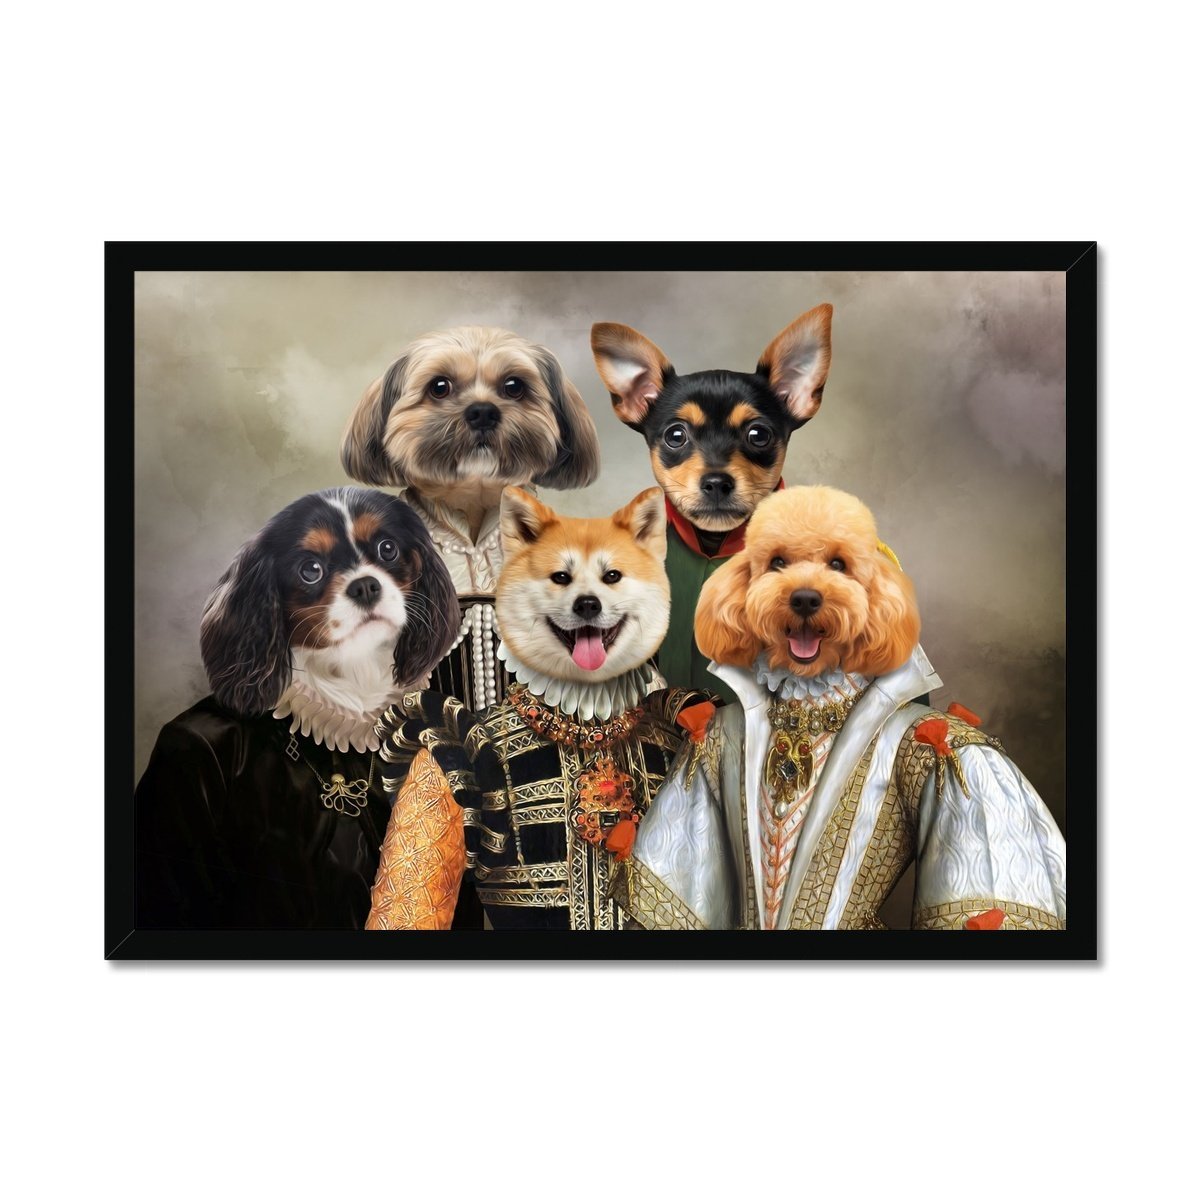 The Dignified: Custom Framed 5 Pet Portrait - Paw & Glory, pawandglory, dog portrait images, aristocrat dog painting, drawing pictures of pets, admiral pet portrait, dog portrait background colors, cat picture painting, pet portrait